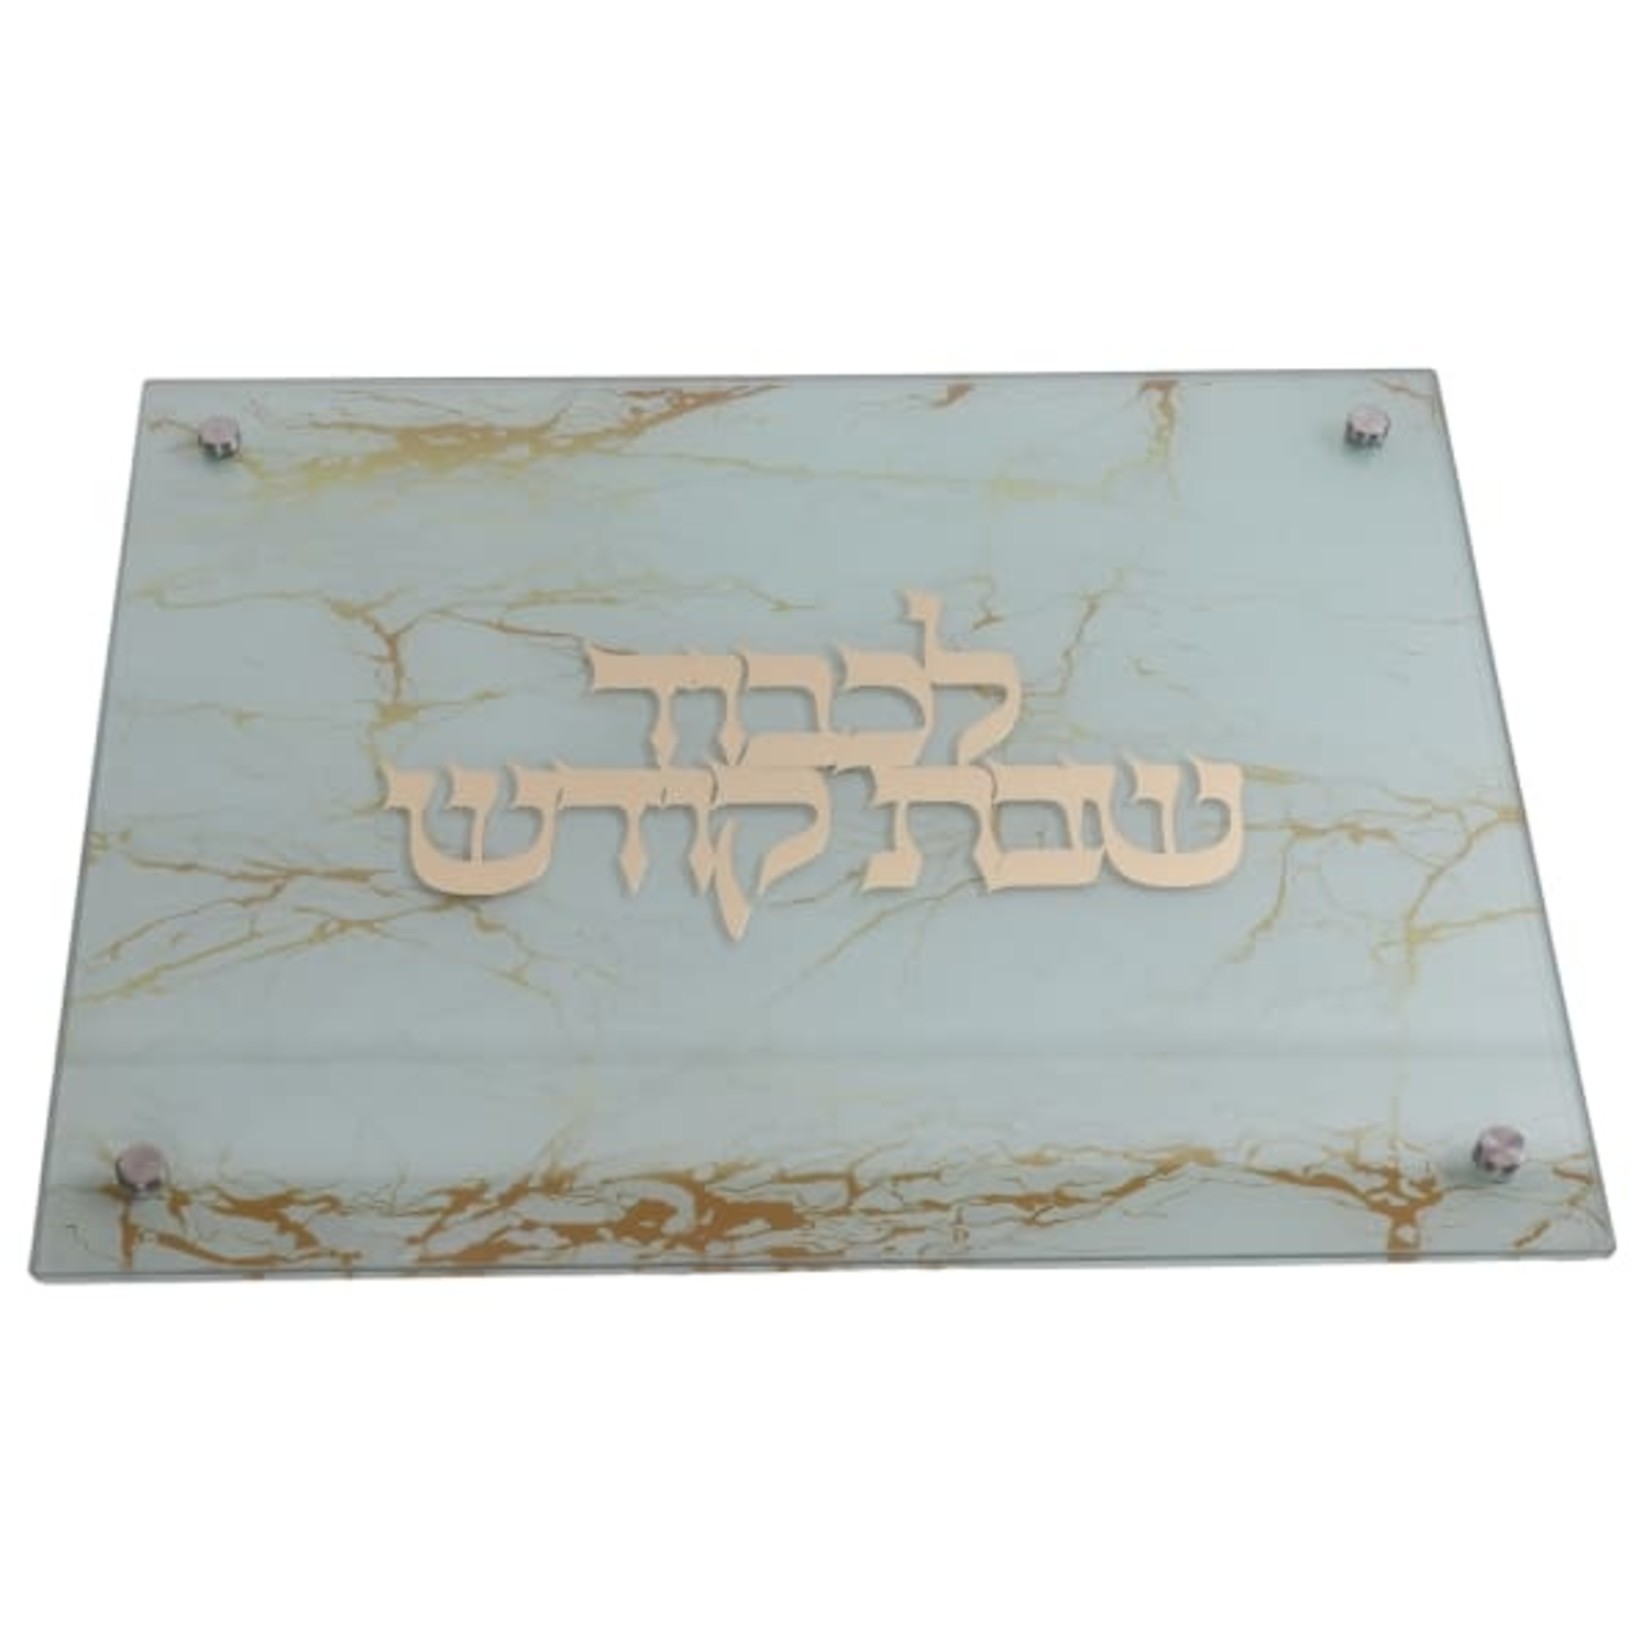 183049 Marble Tray - Gold/Silver 11.5"x15